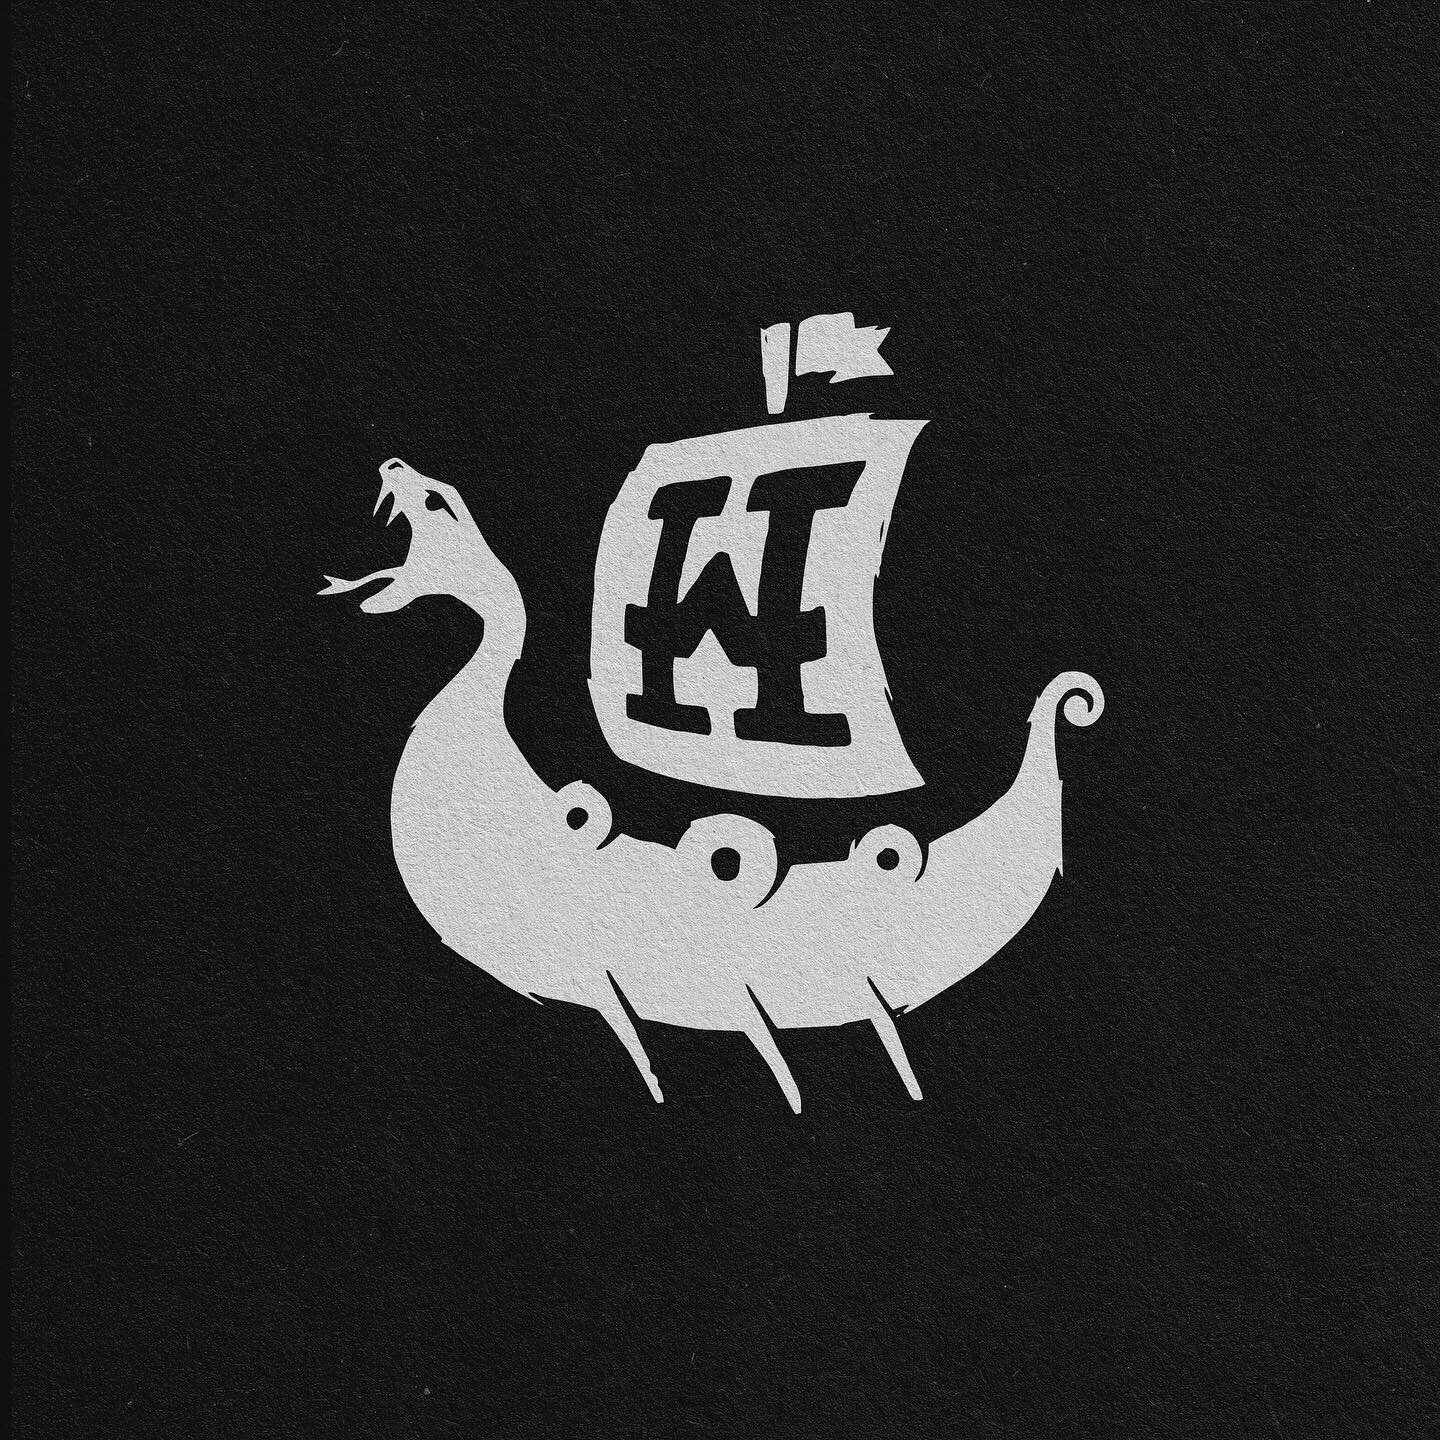 Just your average serpent viking ship
. .
. .
. .
. .
#logoinspirations #logolove #dopetypesociety #typespire #handmadefont #strengthinletters #typematters #ligaturecollective #typographists #typetopia #typeography #letteringinspiration #artoftype #h